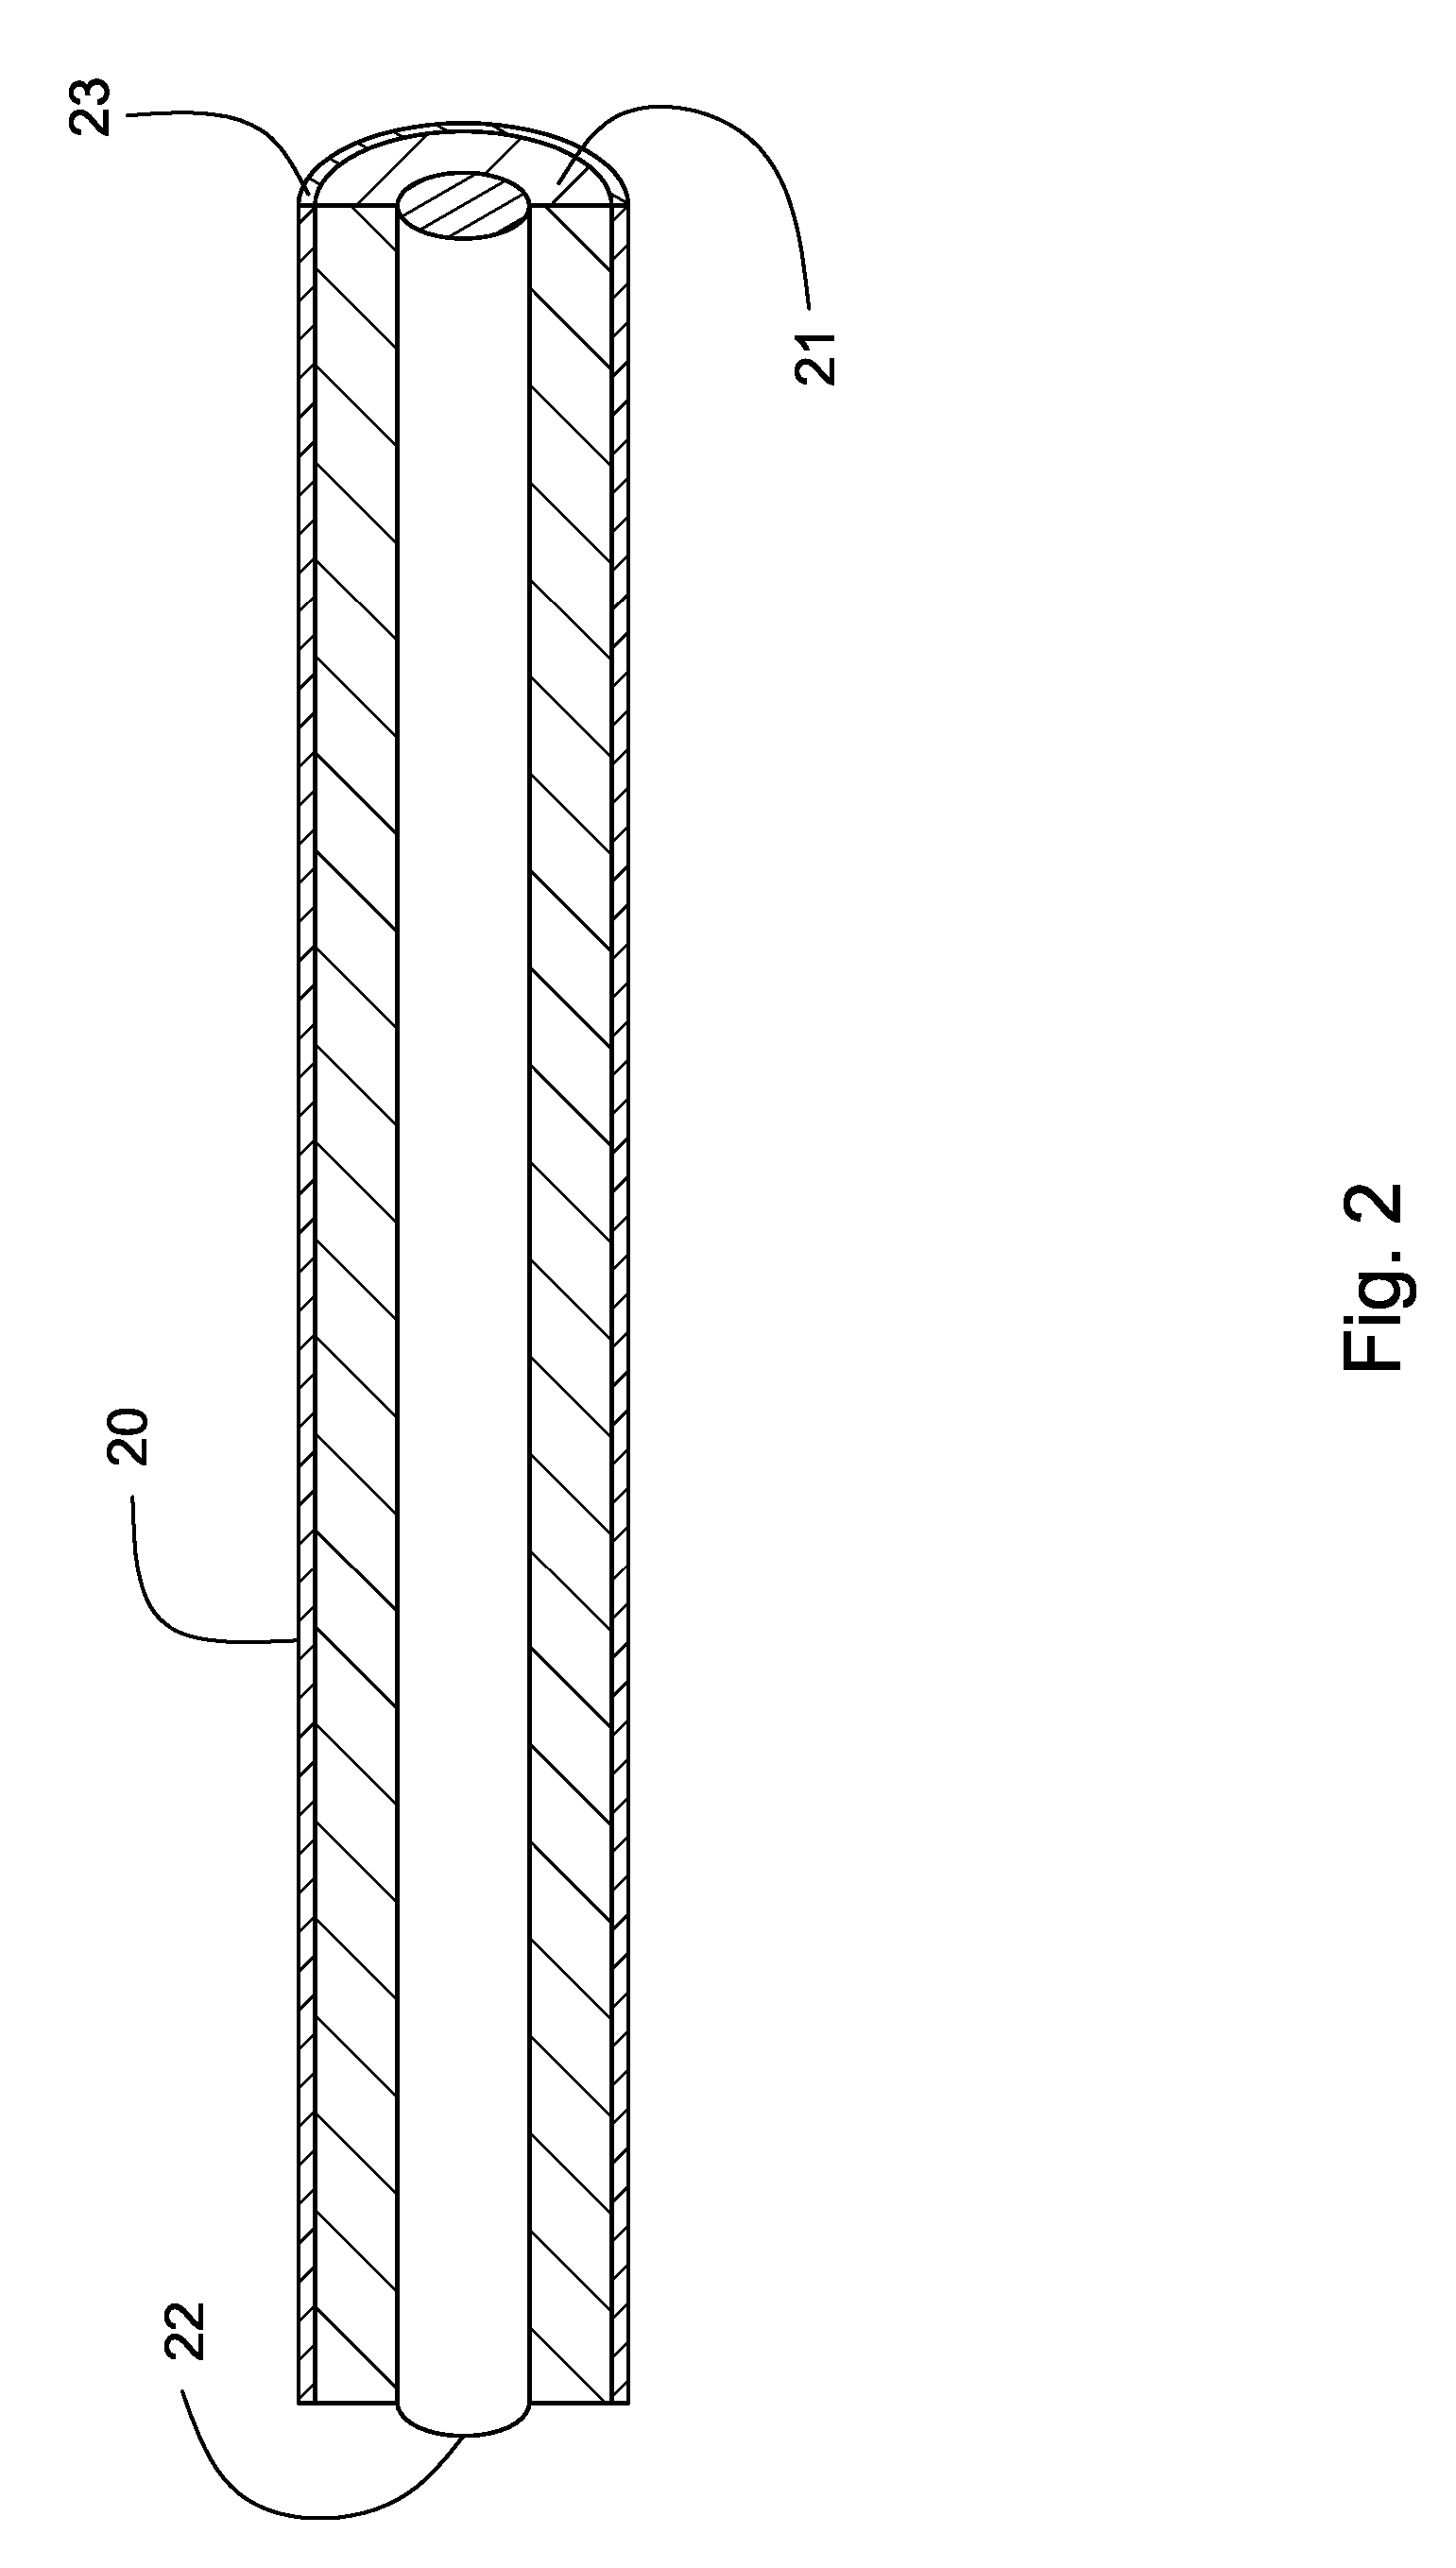 Load-resistant coaxial transmission line